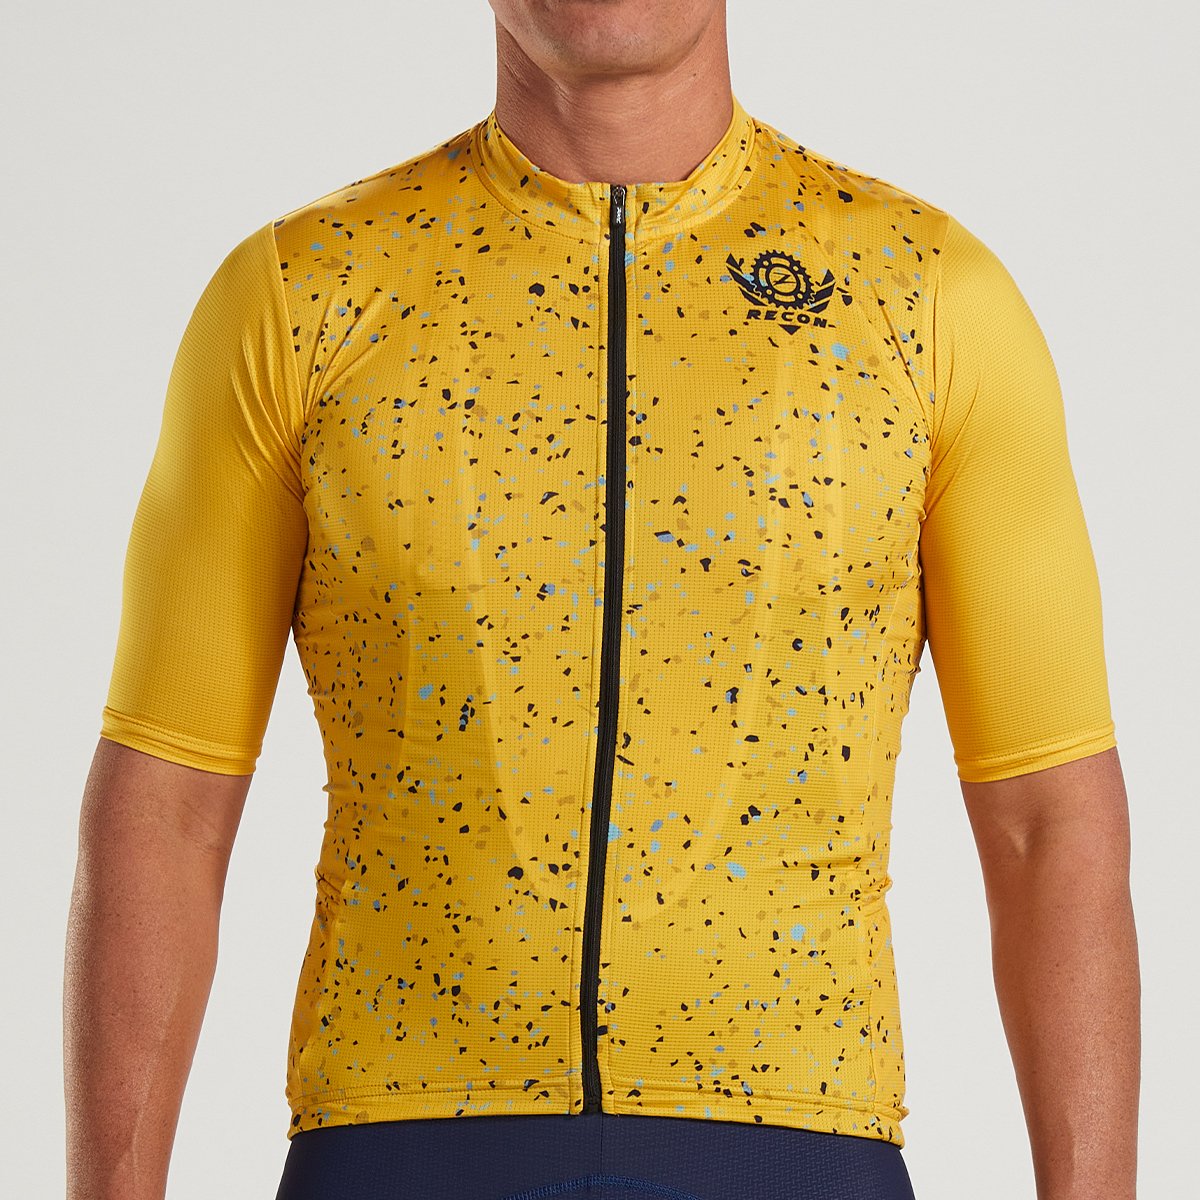 Zoot Sports Mens Recon Cycle Jersey - Sulpher